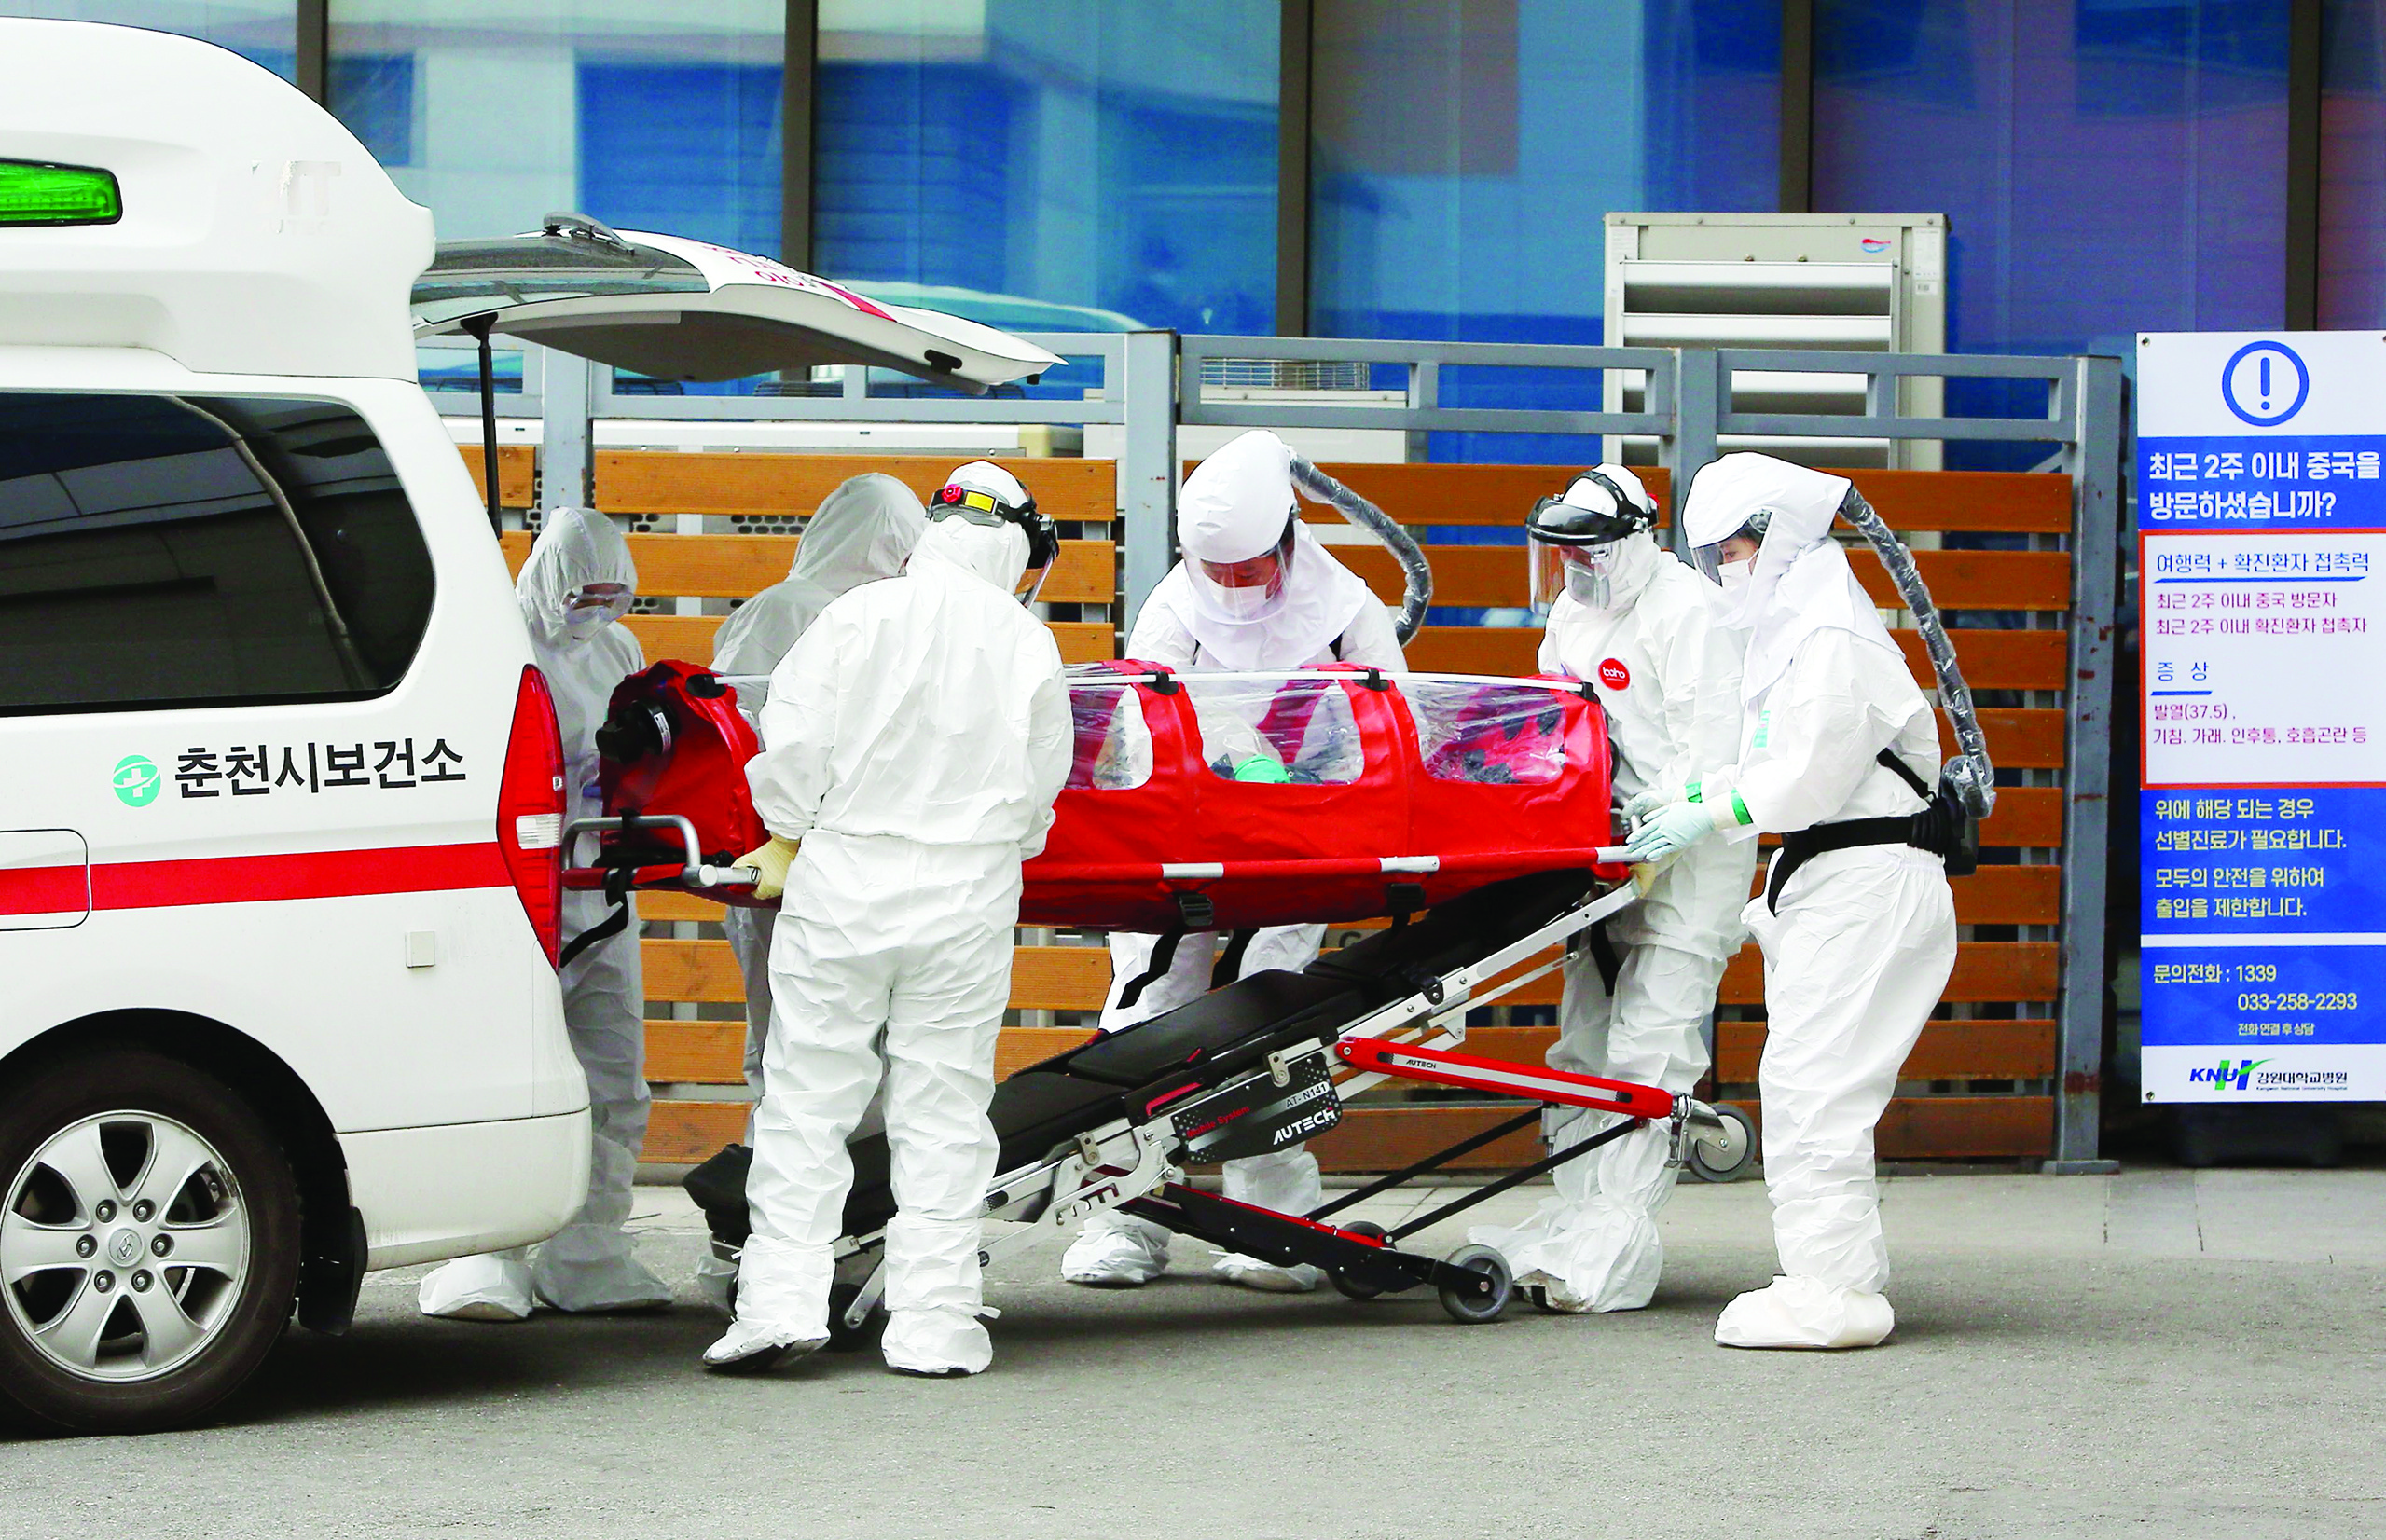 TOPSHOT - Medical workers wearing protective gear carry a patient infected with the COVID-19 coronavirus at a hospital in Chuncheon on February 22, 2020. - South Korea reported 142 more coronavirus cases on February 22, the sharpest spike in infections yet, with more than half of the new cases linked to a hospital in a southern city. The national toll of 346 is now the second-highest outside of China. (Photo by - / YONHAP / AFP) / - South Korea OUT / REPUBLIC OF KOREA OUT  NO ARCHIVES  RESTRICTED TO SUBSCRIPTION USE